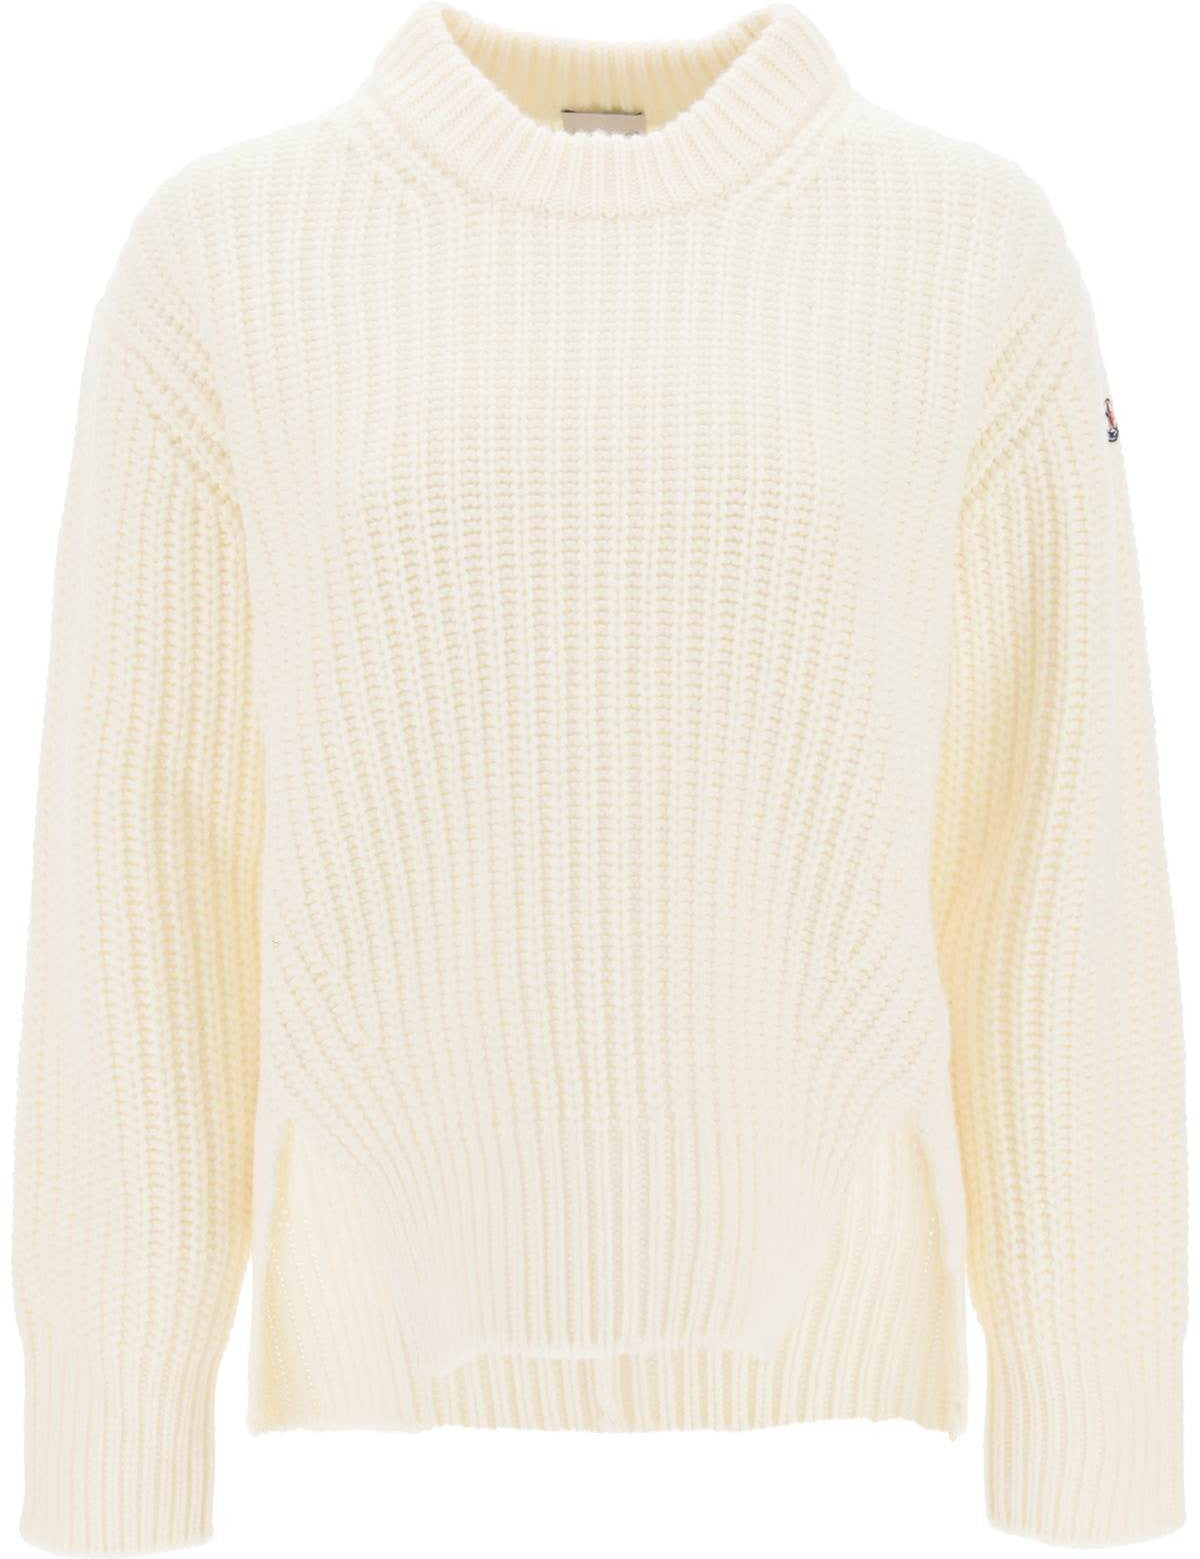 moncler-basic-crew-neck-sweater-in-carded-wool.jpg